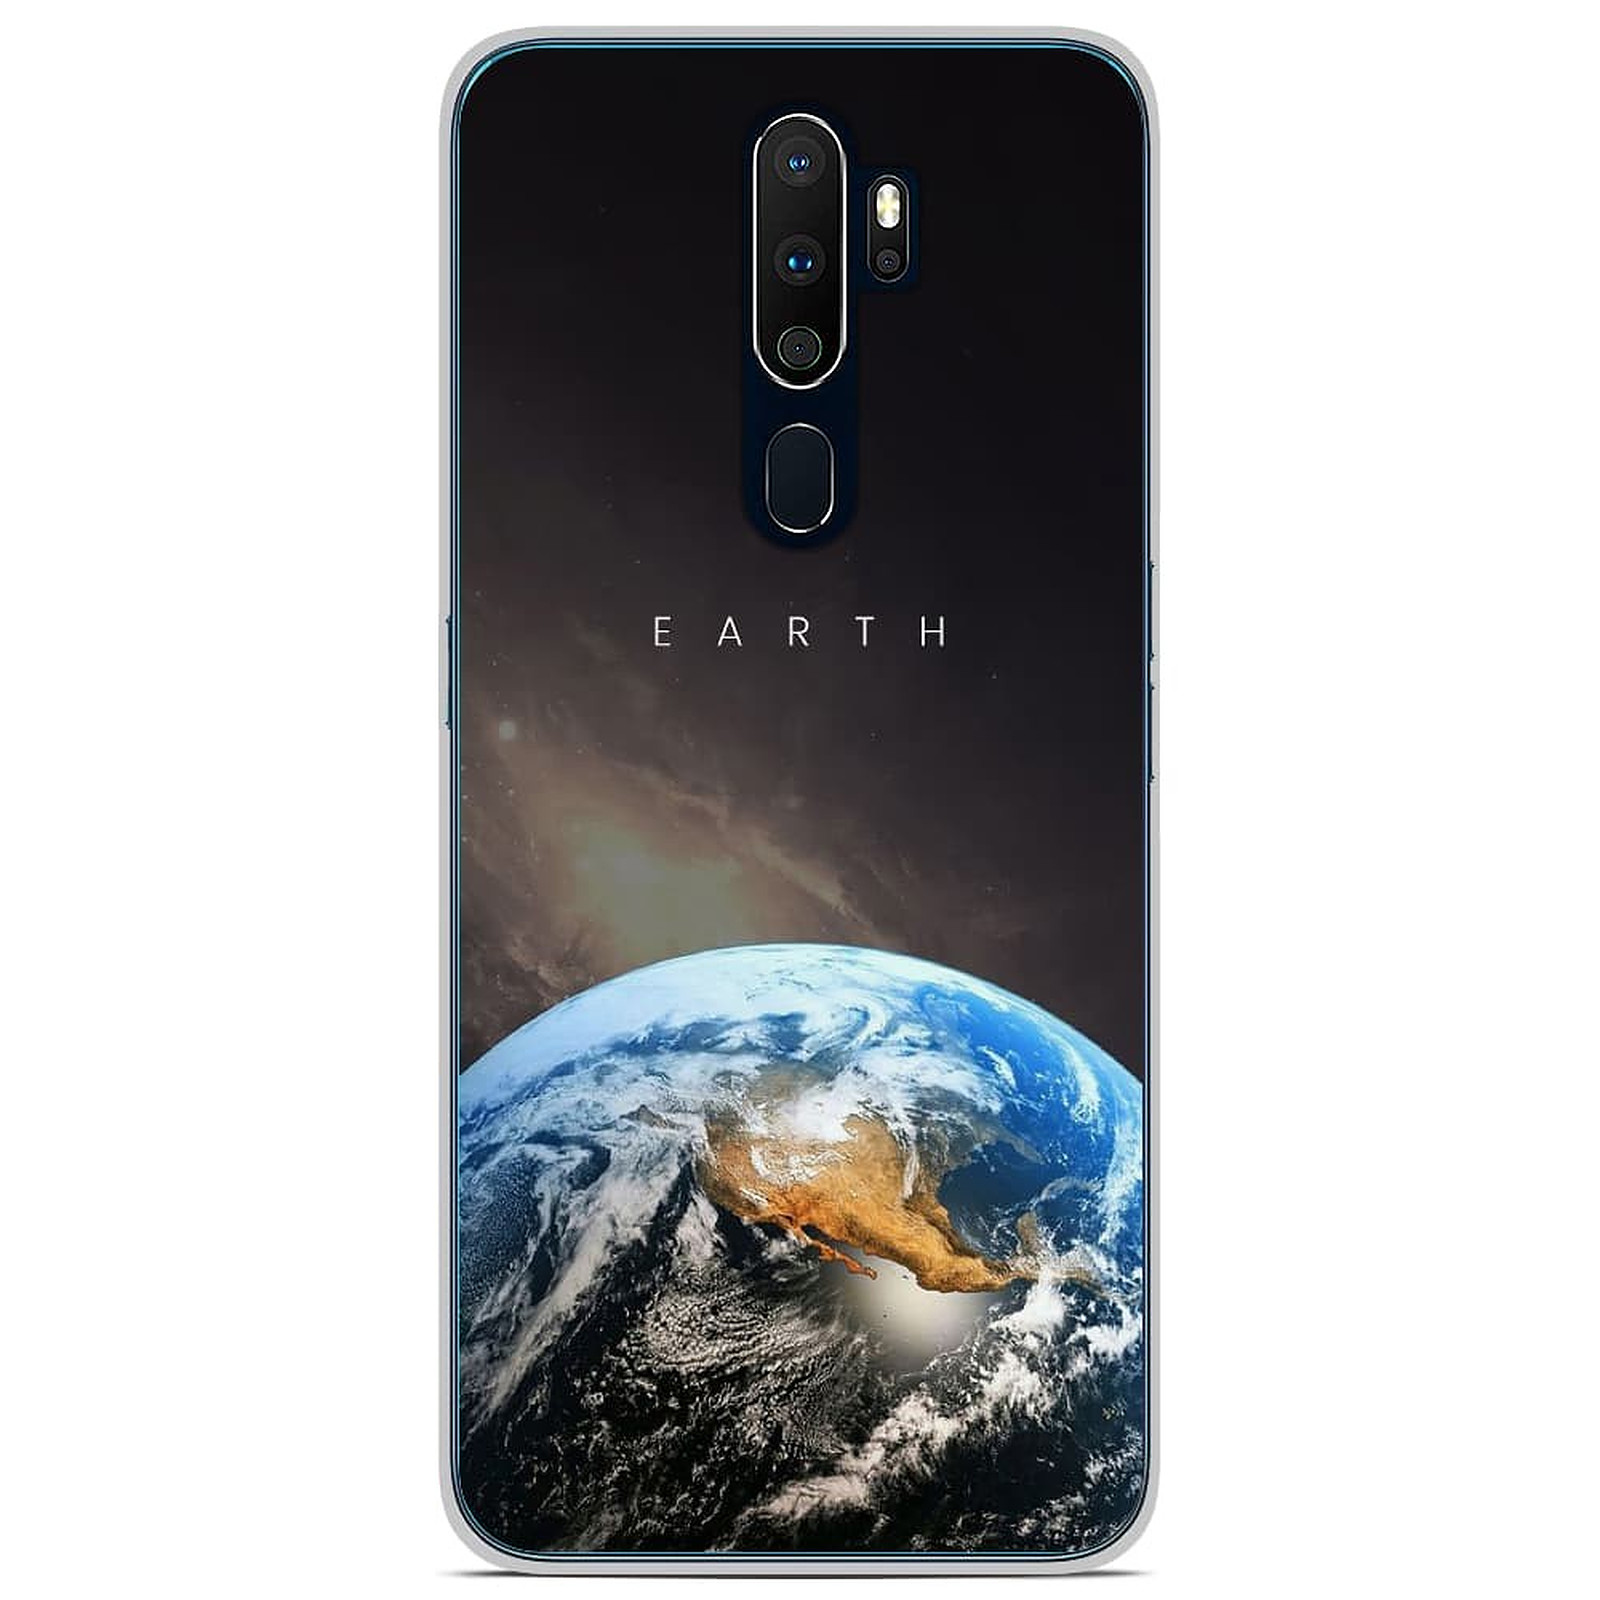 1001 Coques Coque silicone gel Oppo A9 2020 motif Earth - Coque telephone 1001Coques